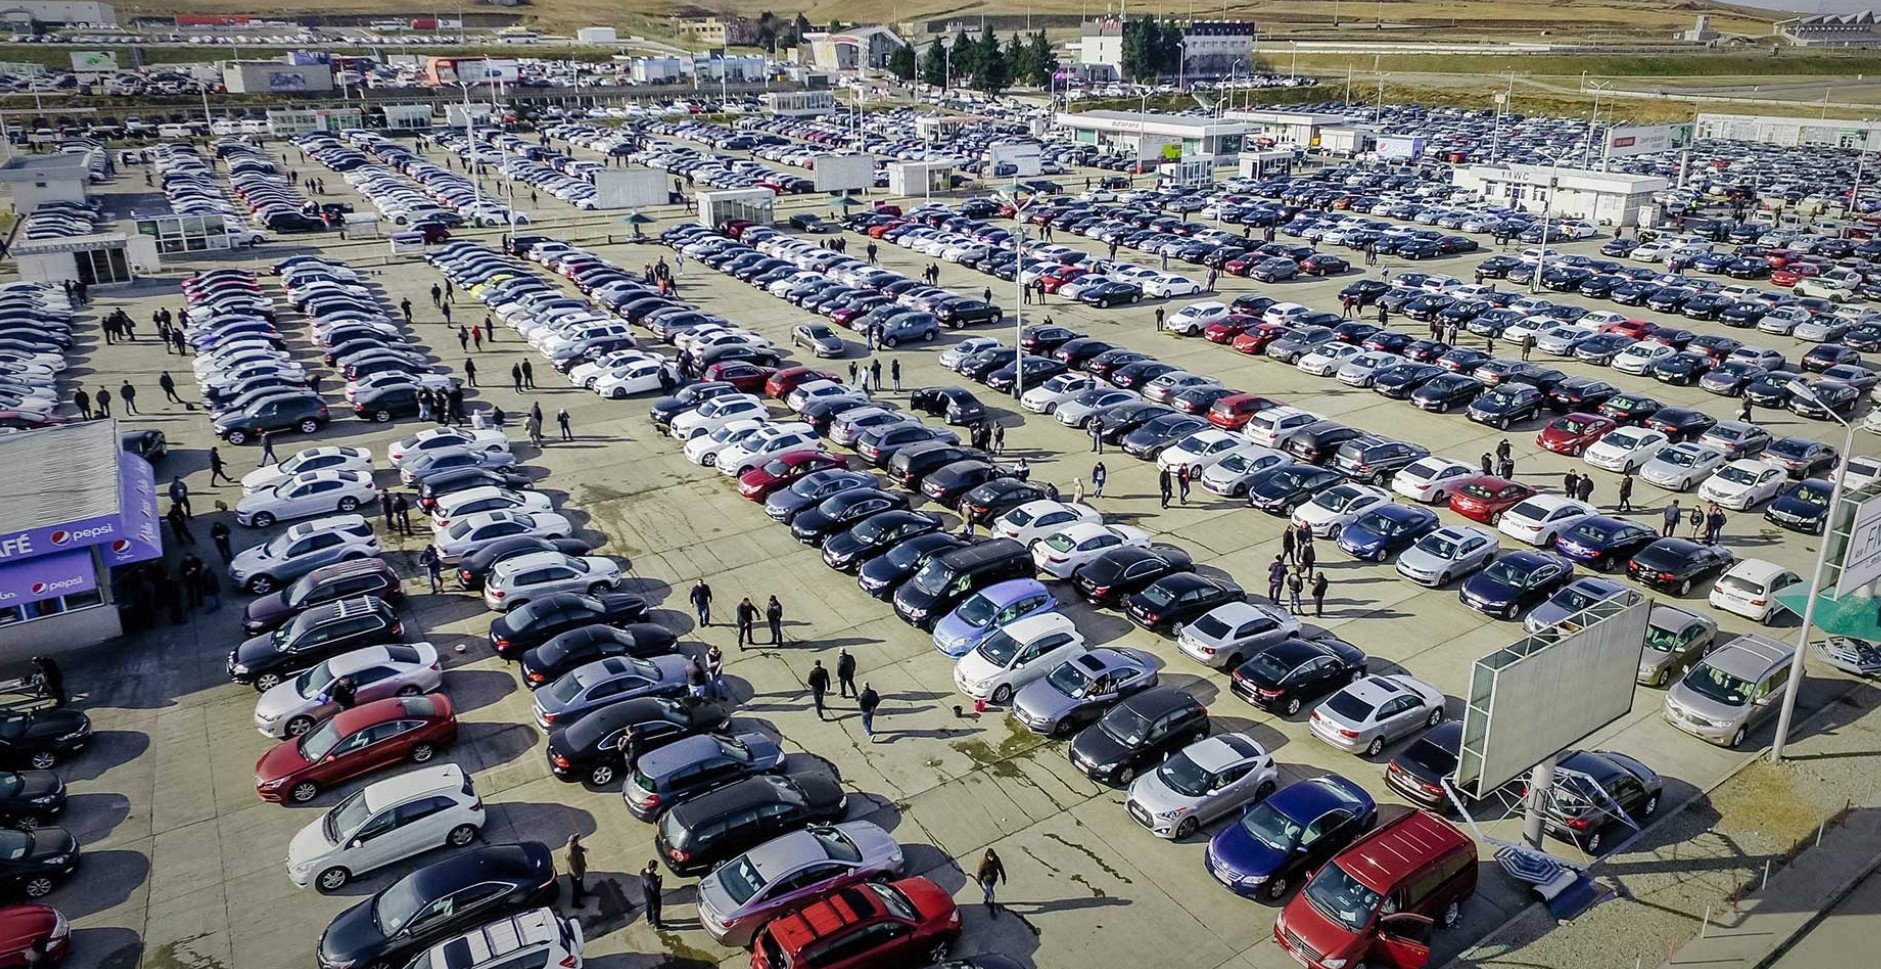 Where are public car auctions